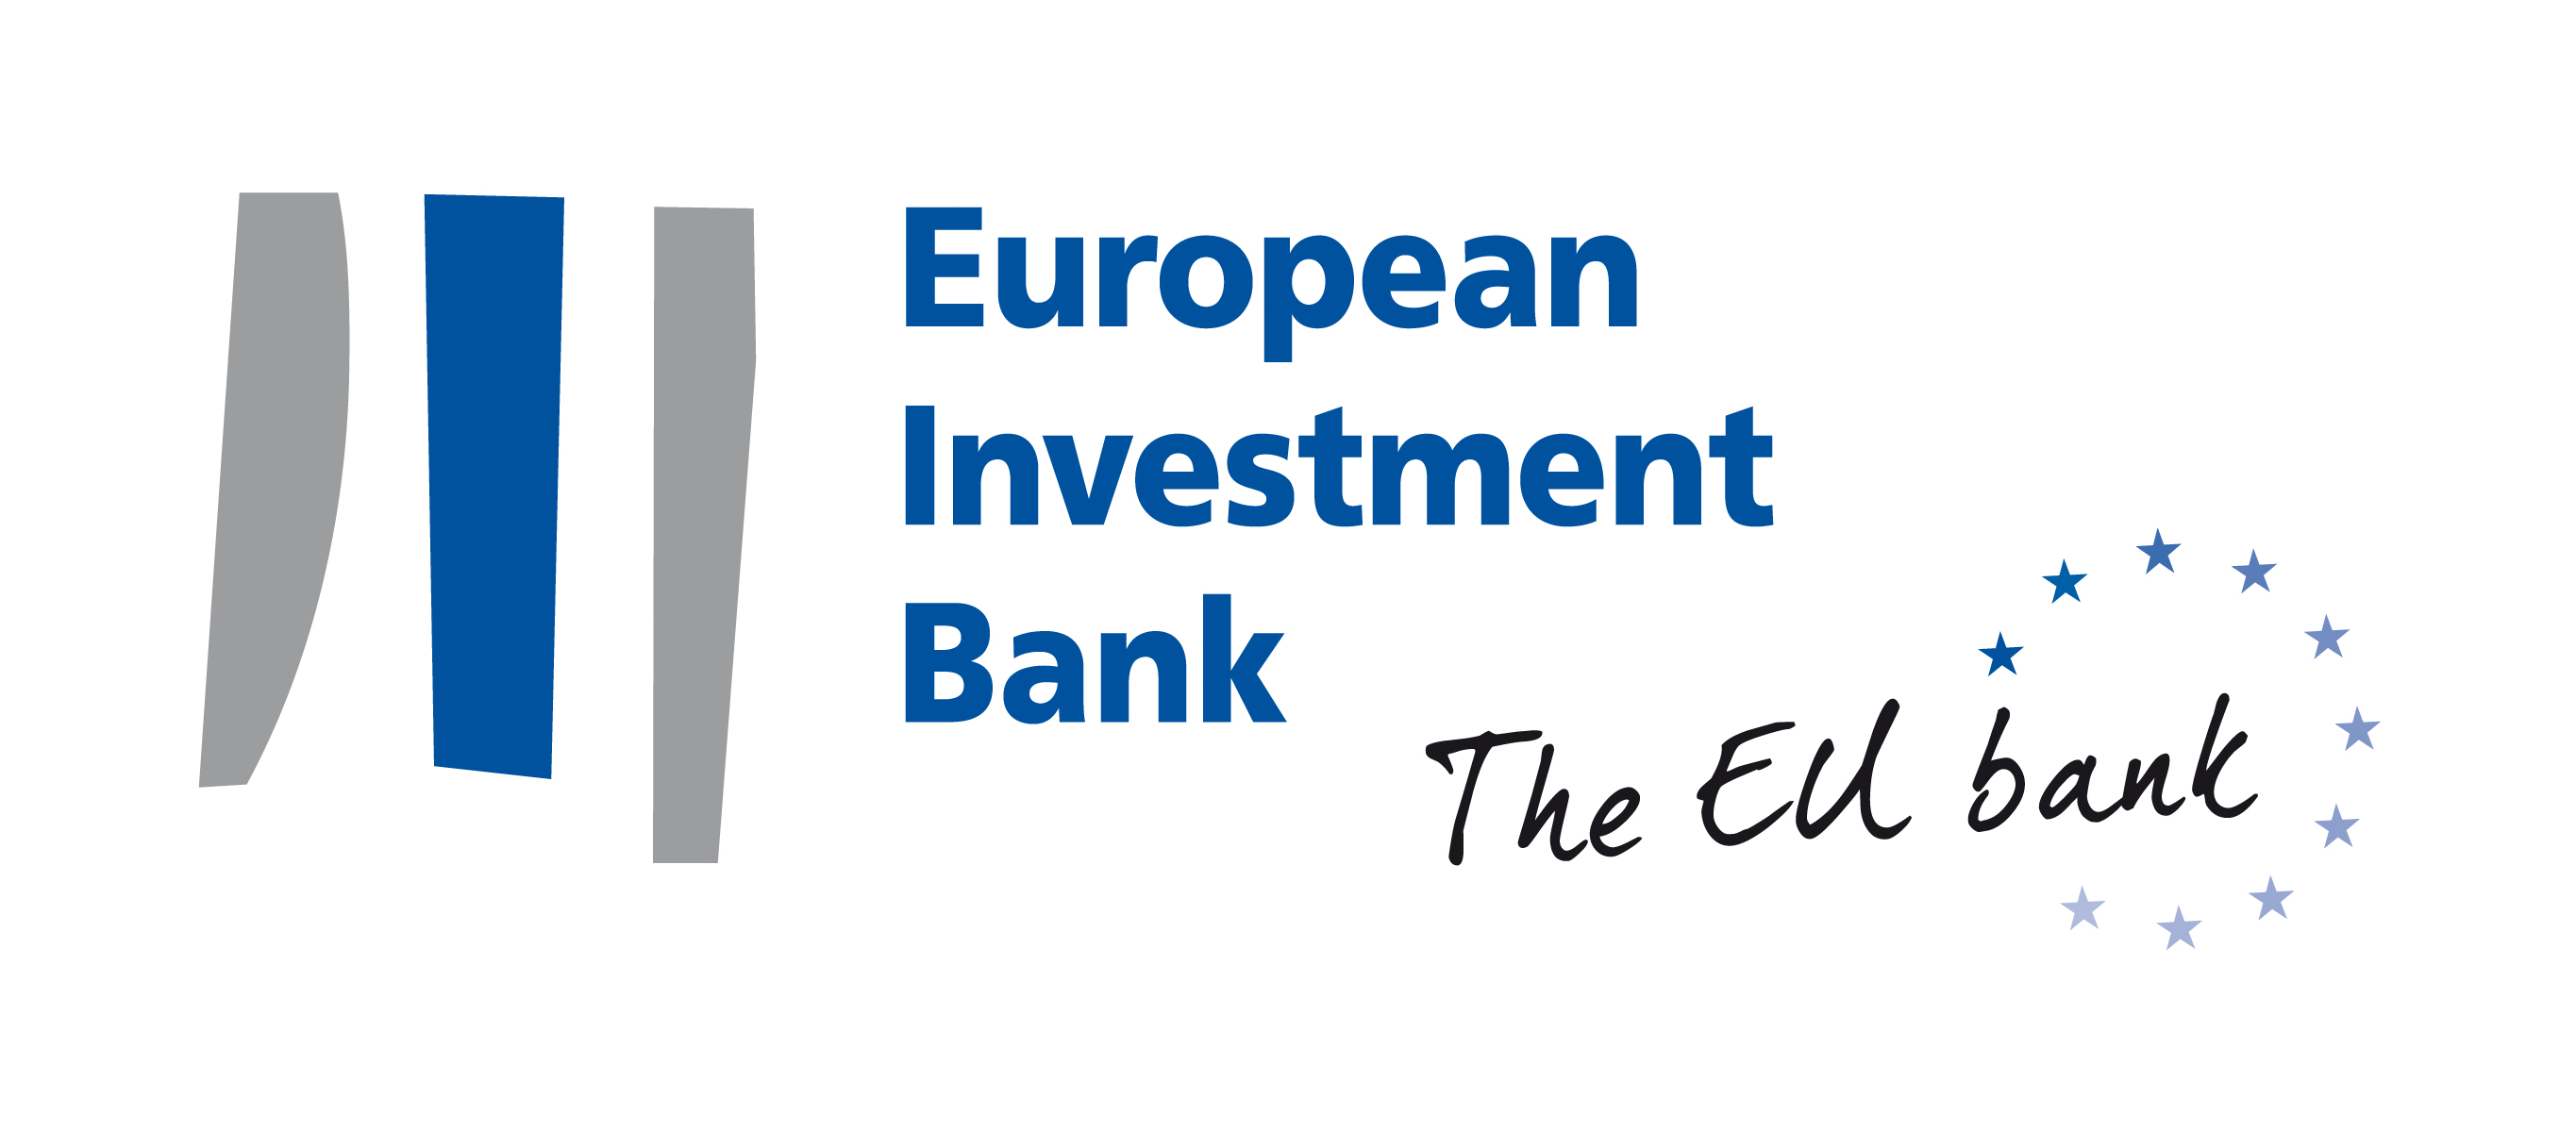 Conference of the Parties (COP27): European Investment Bank (EIB) will Strengthen Support for Just Transition Projects Across the World